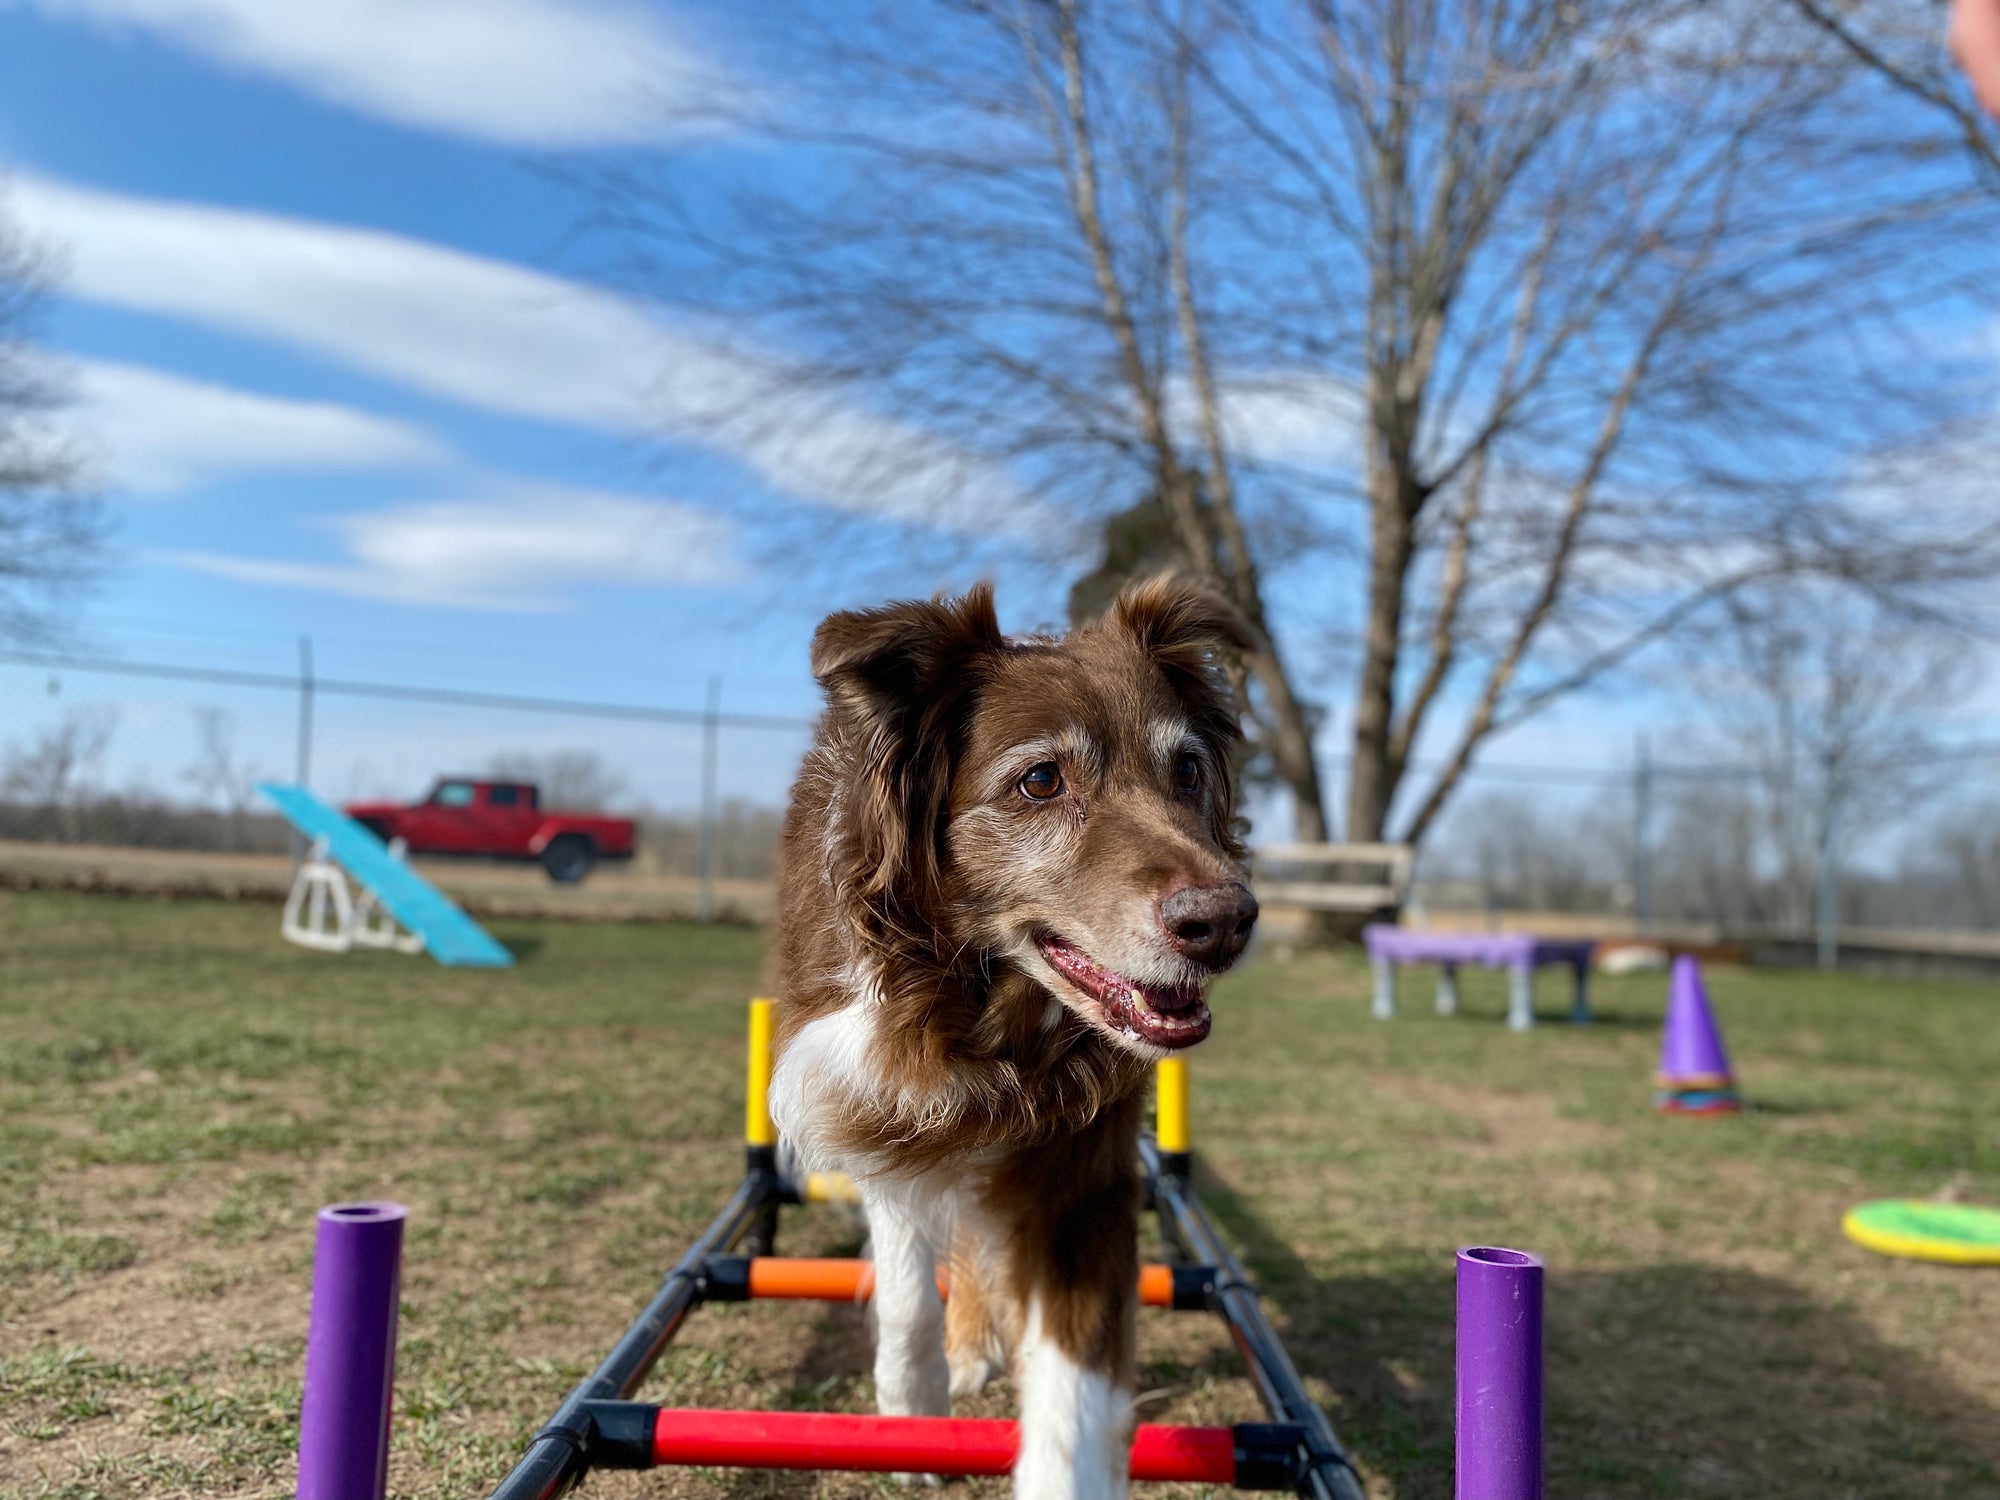 A dog navigating obstacles on a playground.